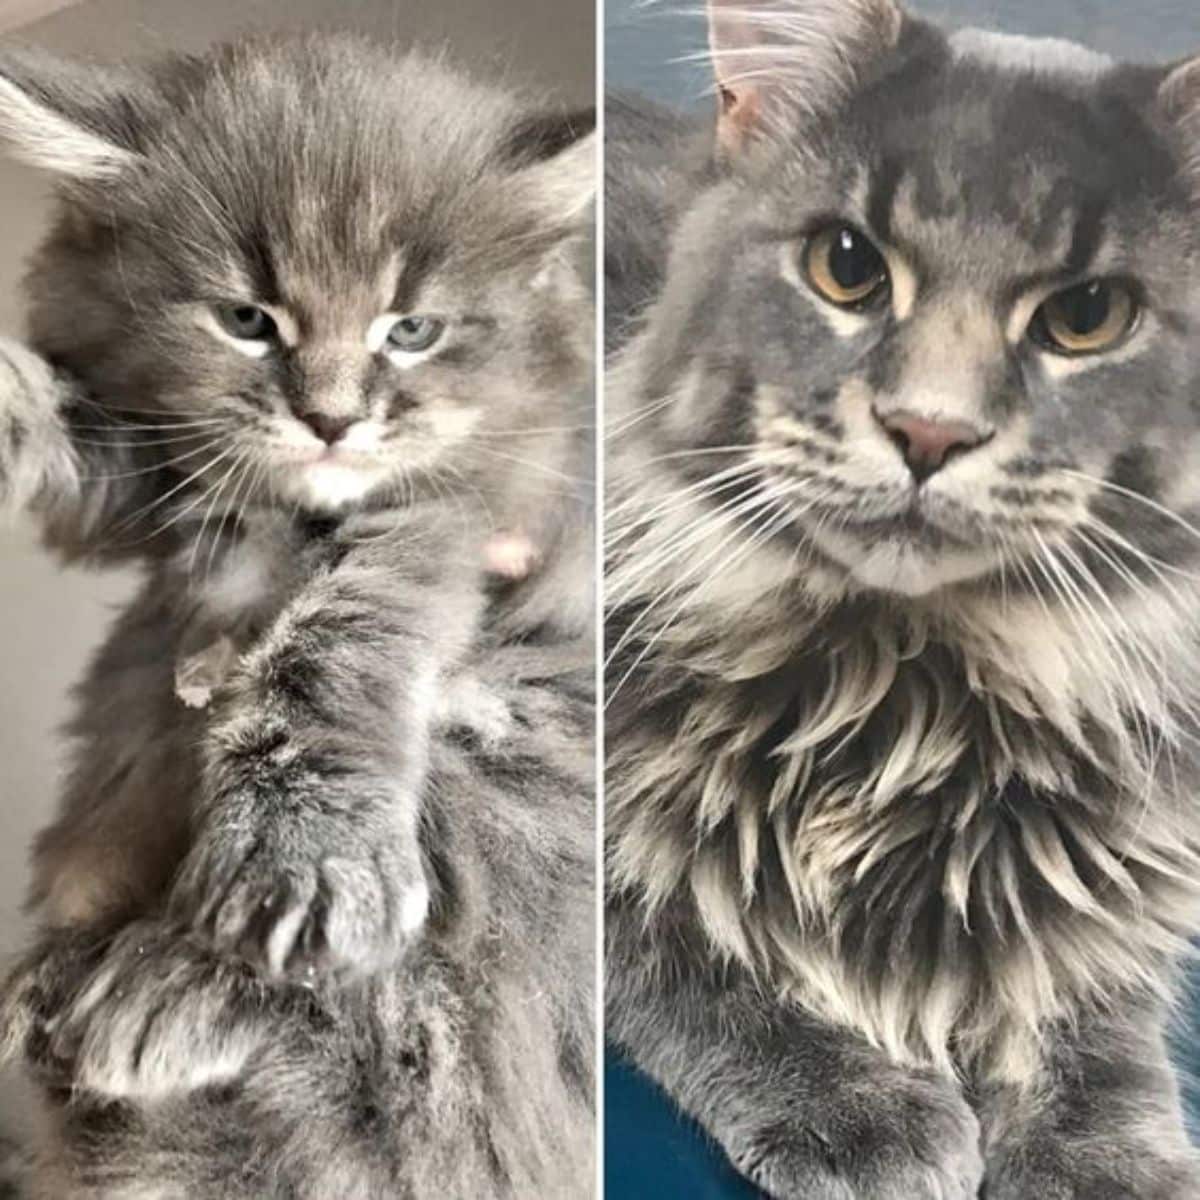 Image of a maine coon kitten and image of a maine coon adult.